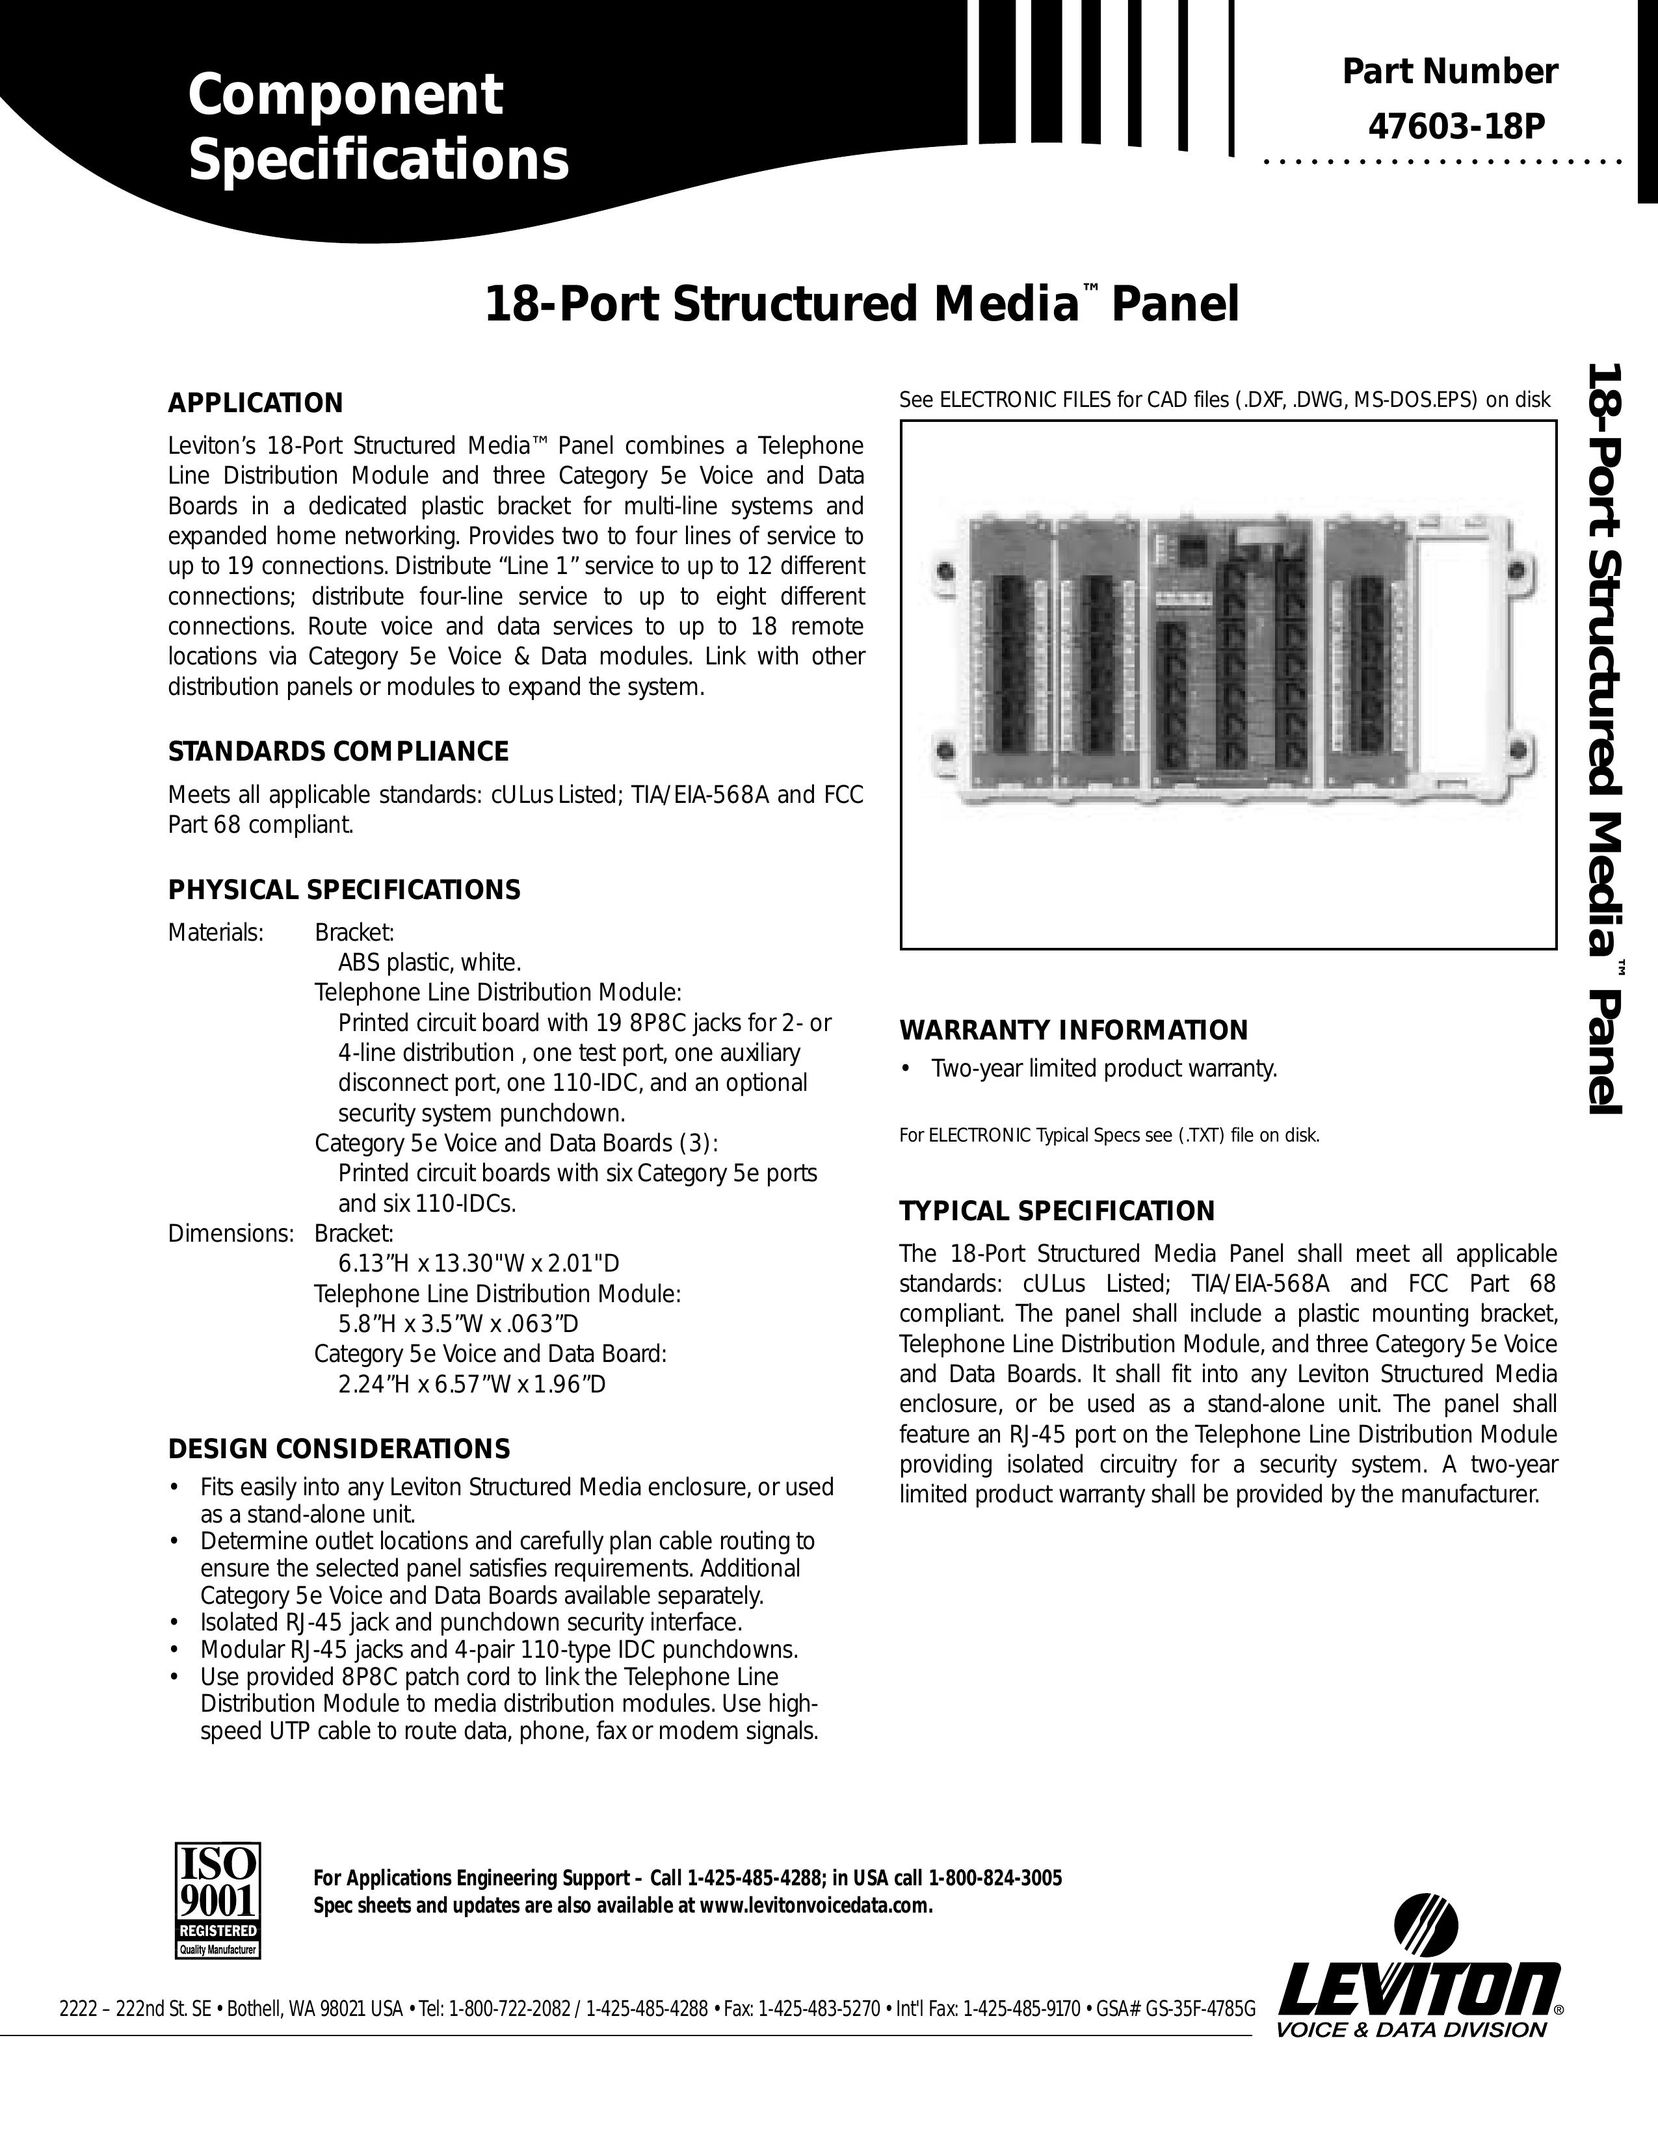 HomeTech 47603-18P Network Router User Manual